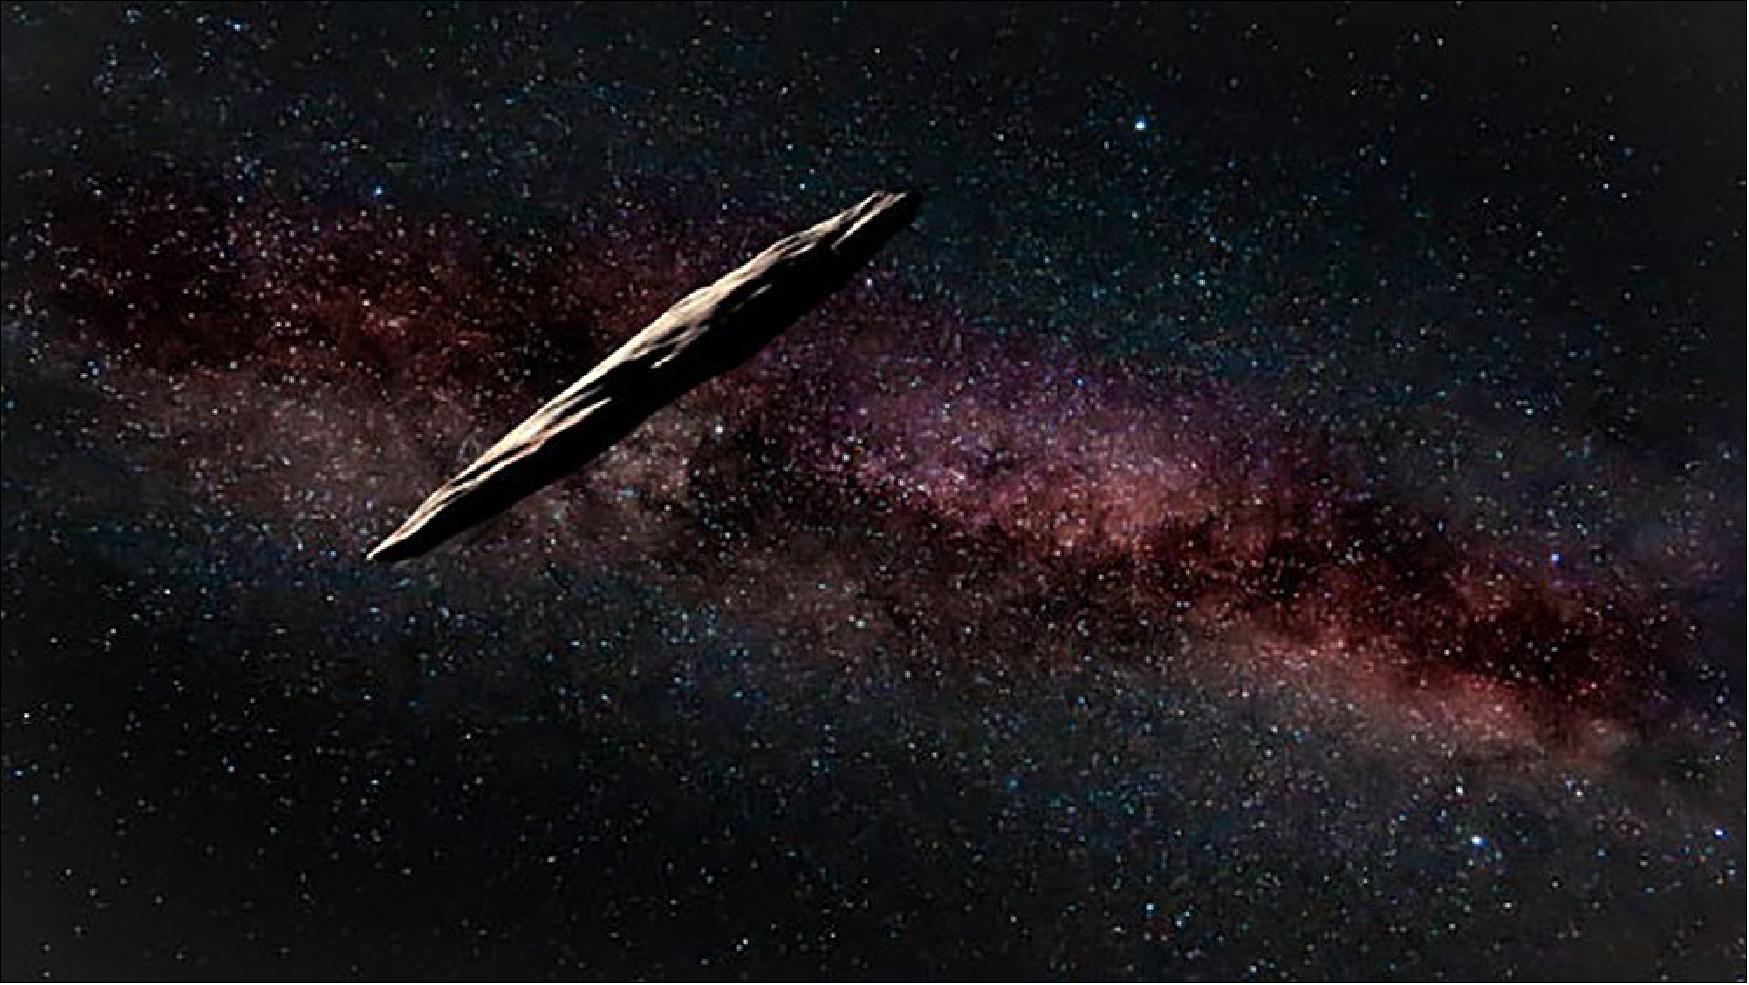 Figure 1: An artist's rendering of 'Oumuamua, a visitor from outside the solar system (image credit: The international Gemini Observatory/NOIRLab/NSF/AURA artwork by J. Pollard)